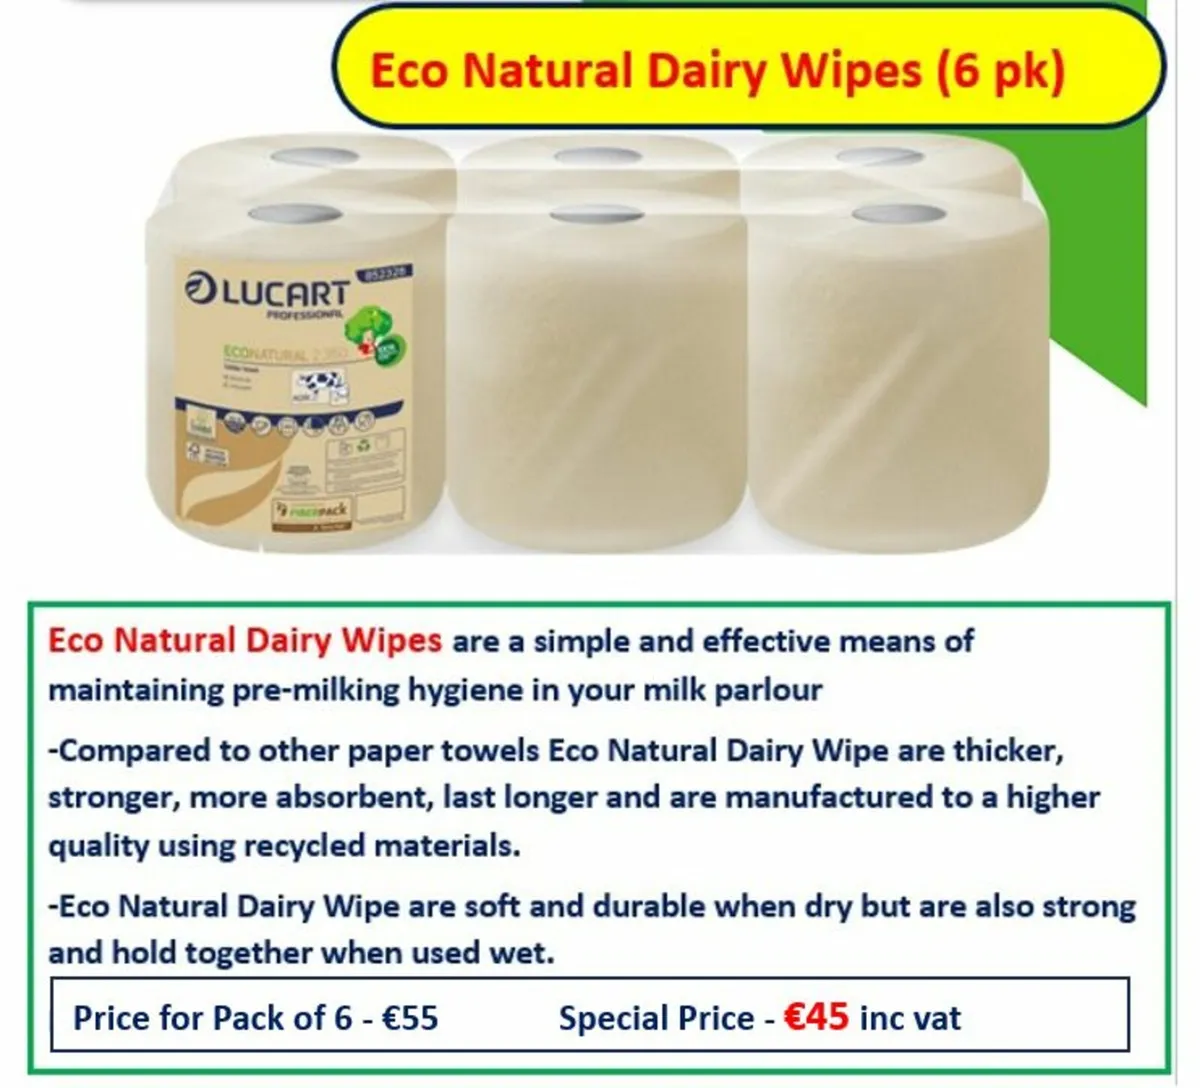 Eco Dairy Wipes for sale at FDS - special offer - Image 1